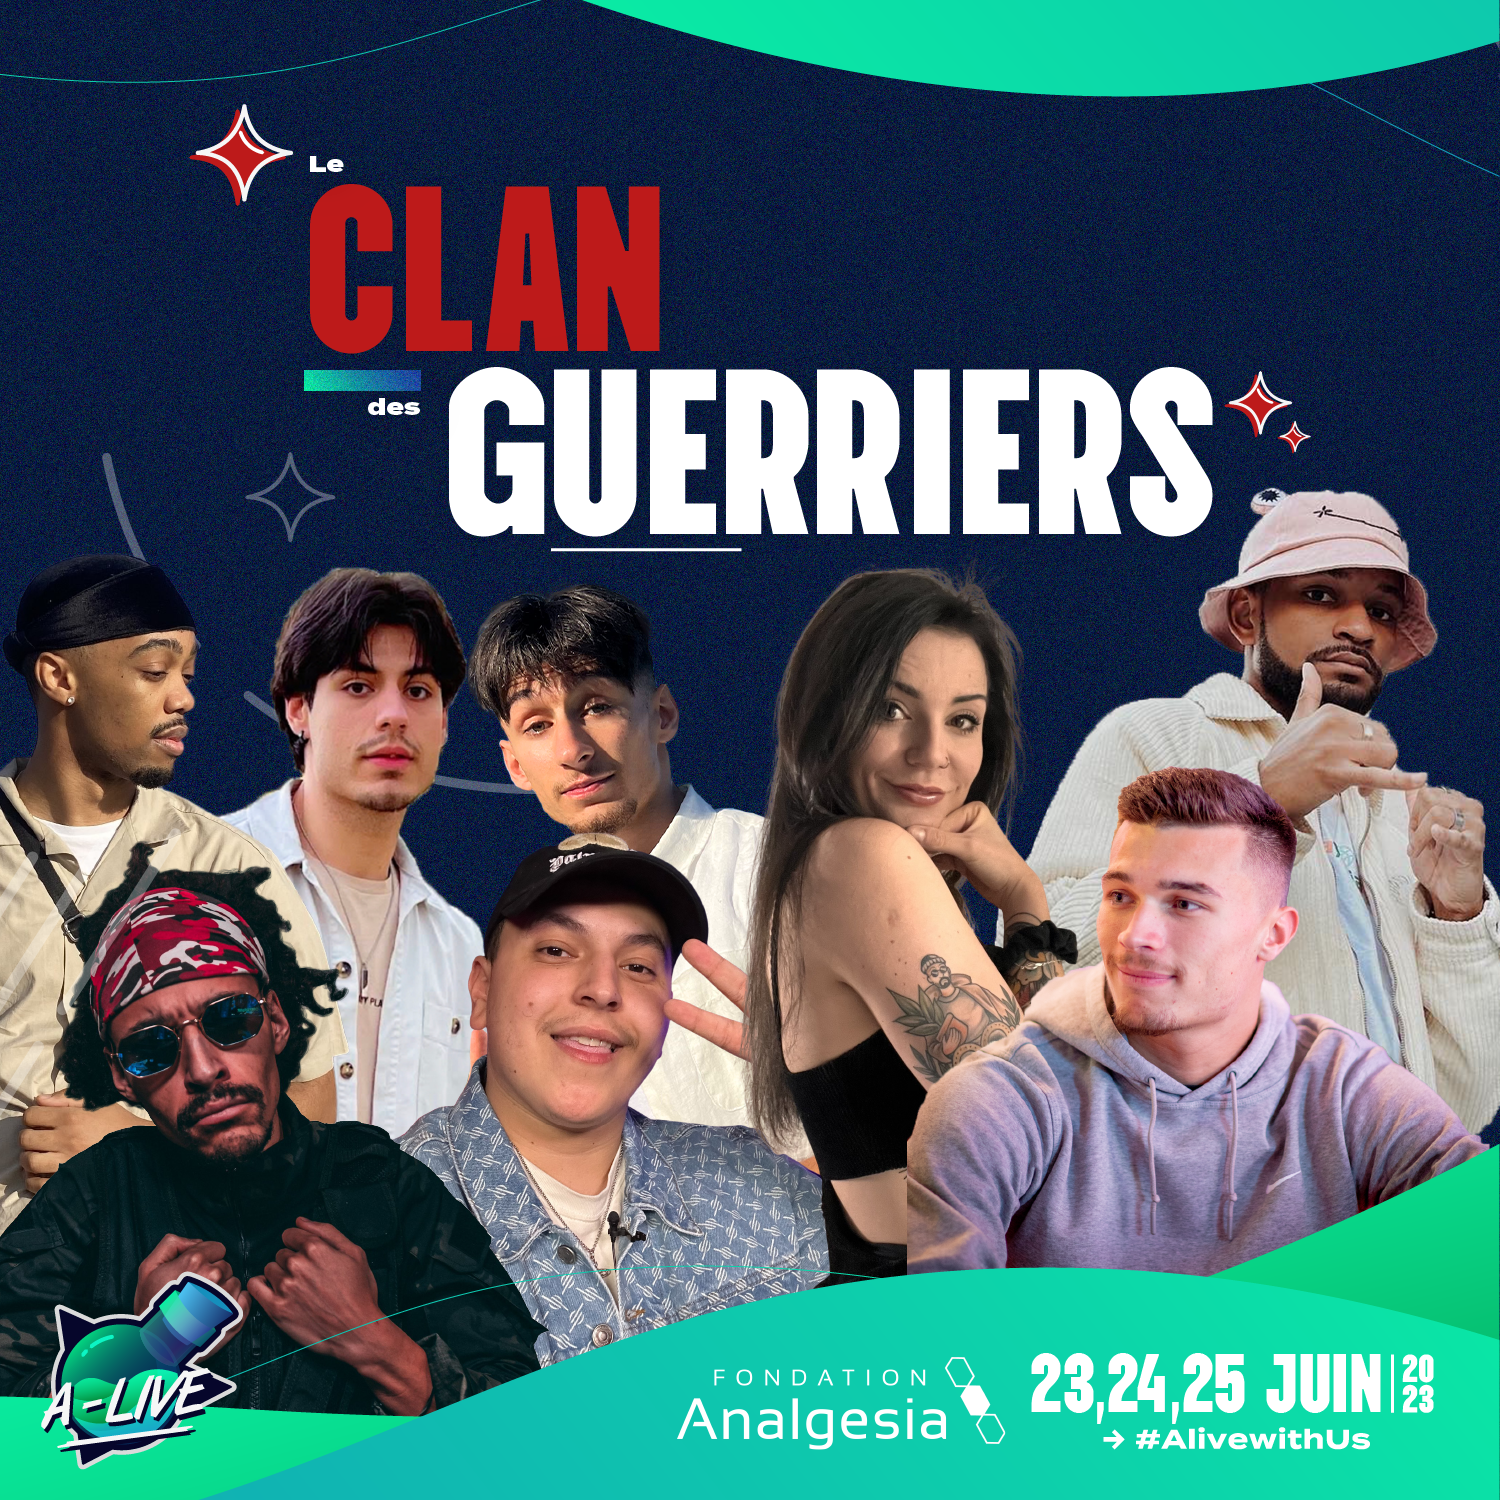 Clan guerriers A-Live 3